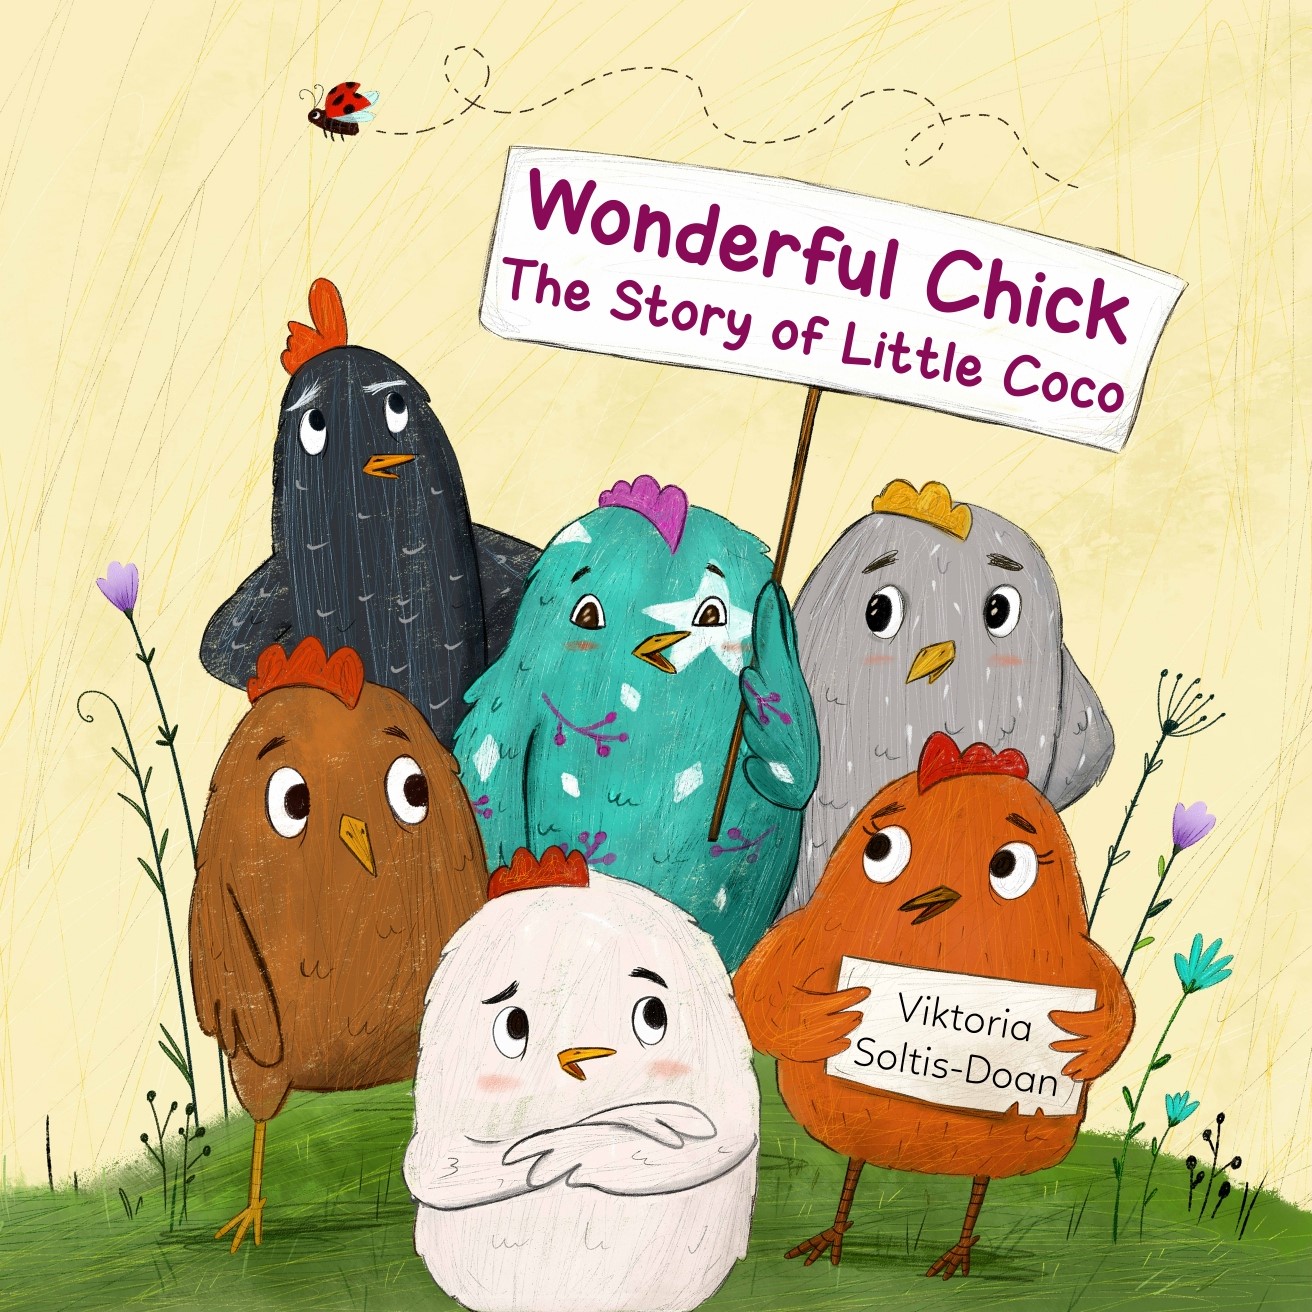 FREE: Wonderful Chick: The Story of Little Coco by Viktoria Soltis-Doan